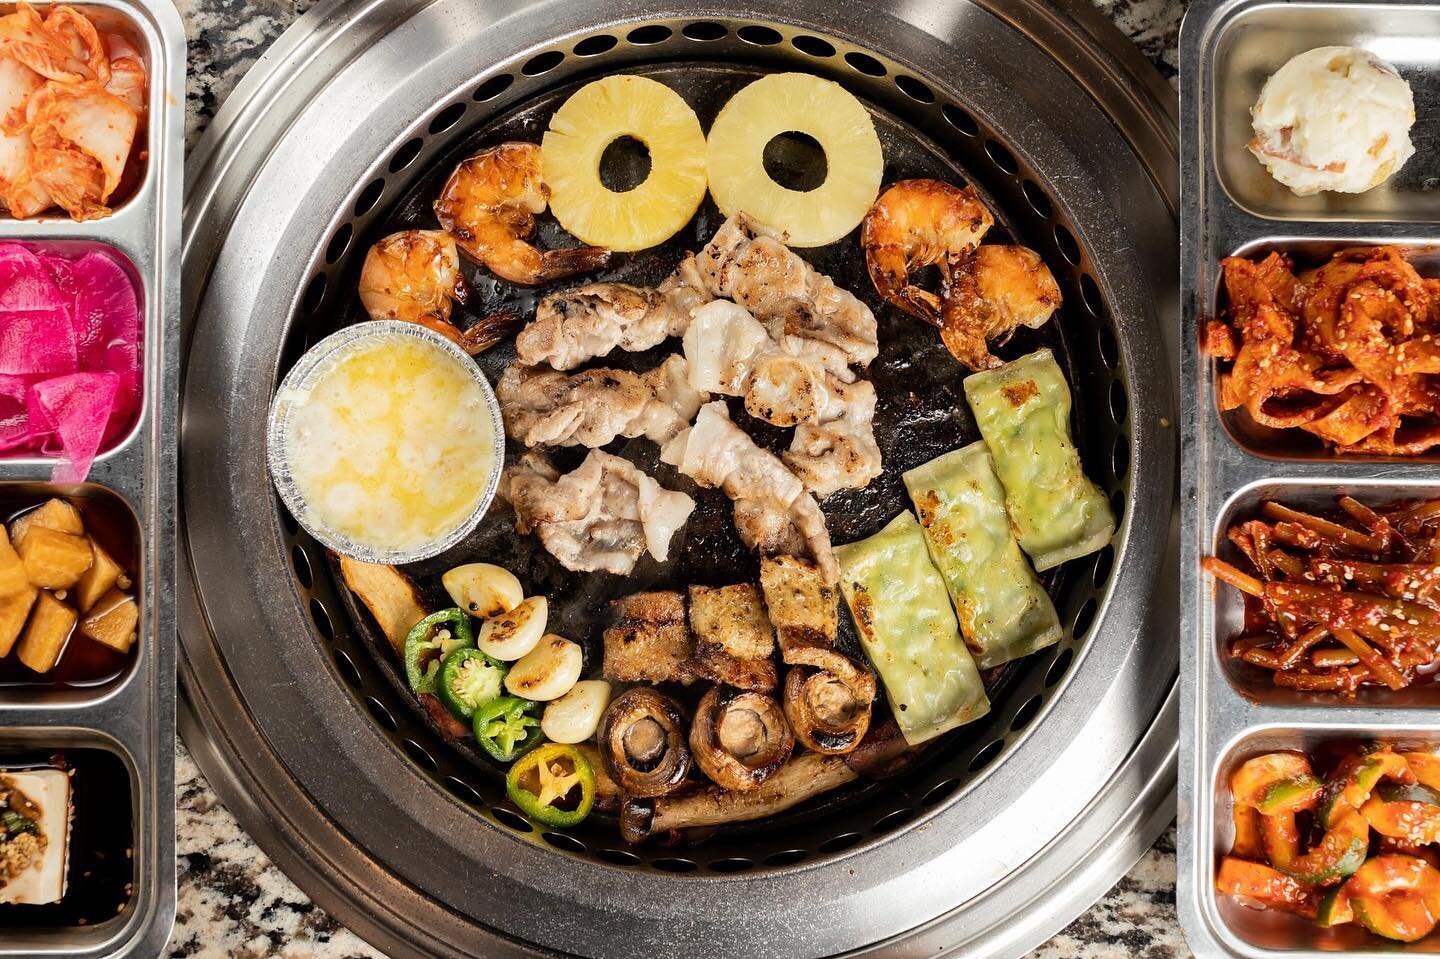 😄 We&rsquo;re smiling because - 1. Our Let&rsquo;s Meat customers and staff are the best. 2. All are welcome to come grill with us this weekend, rain or shine. 3. It&rsquo;s almost the summer! 
.
#memorialdayweekend #koreanbbq #allyoucaneat #letsmea